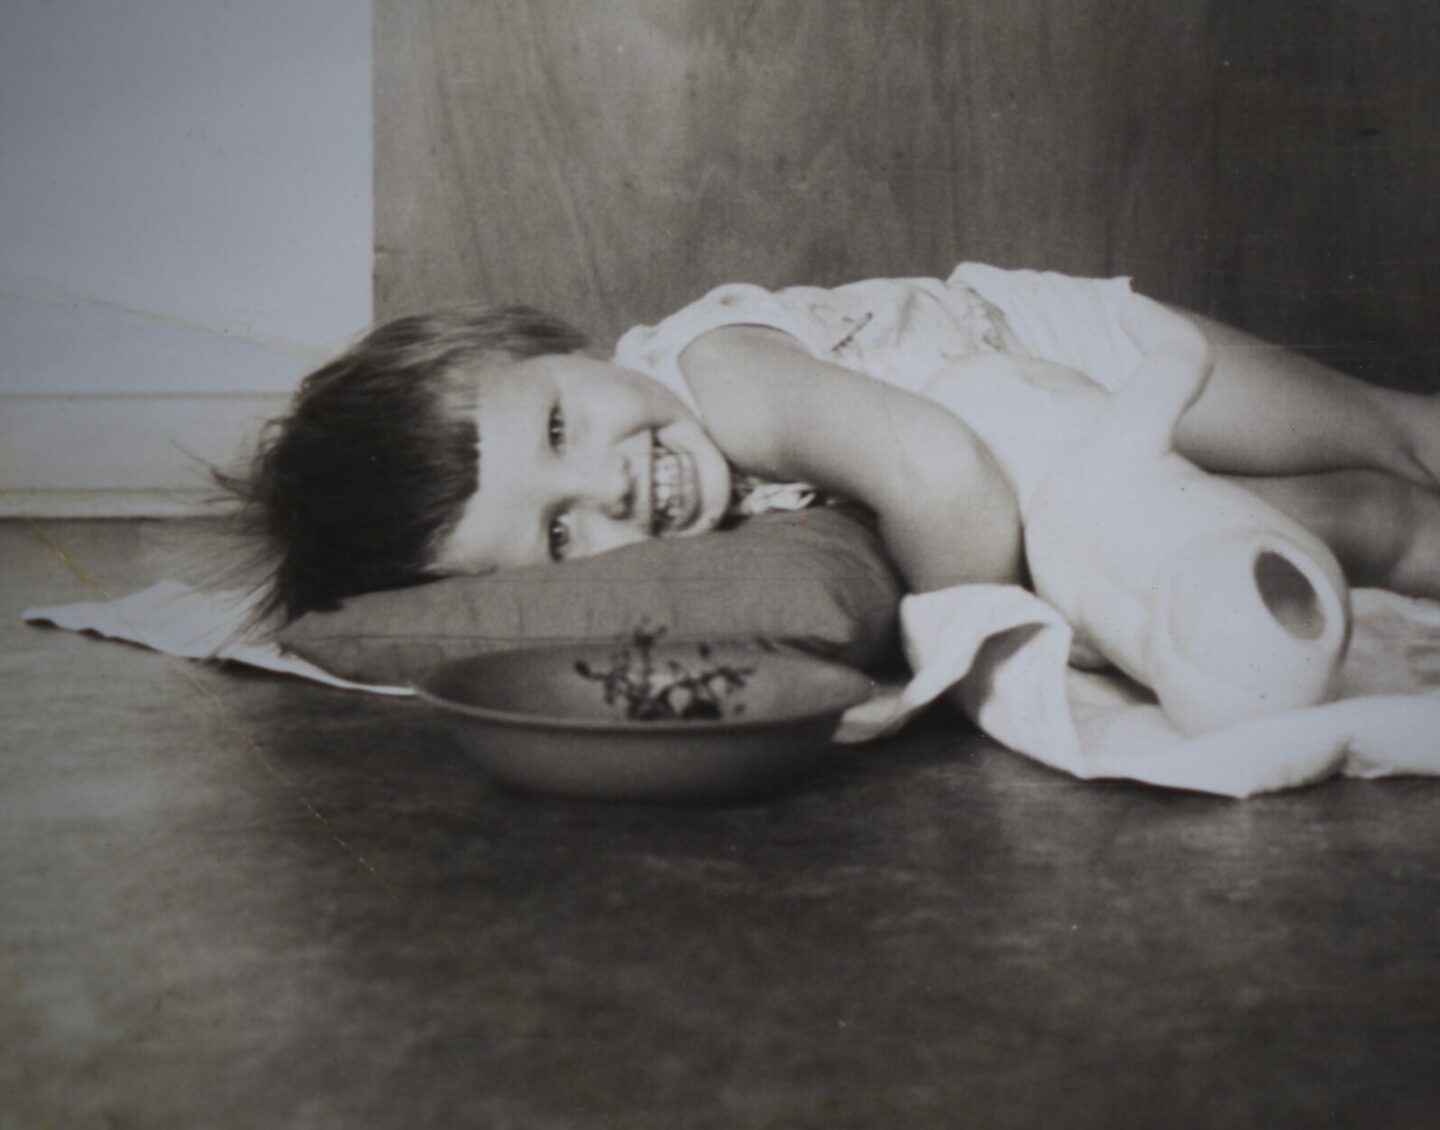 A black and white photograph of a smiling child lying on a pillow on the floor behind a bowl